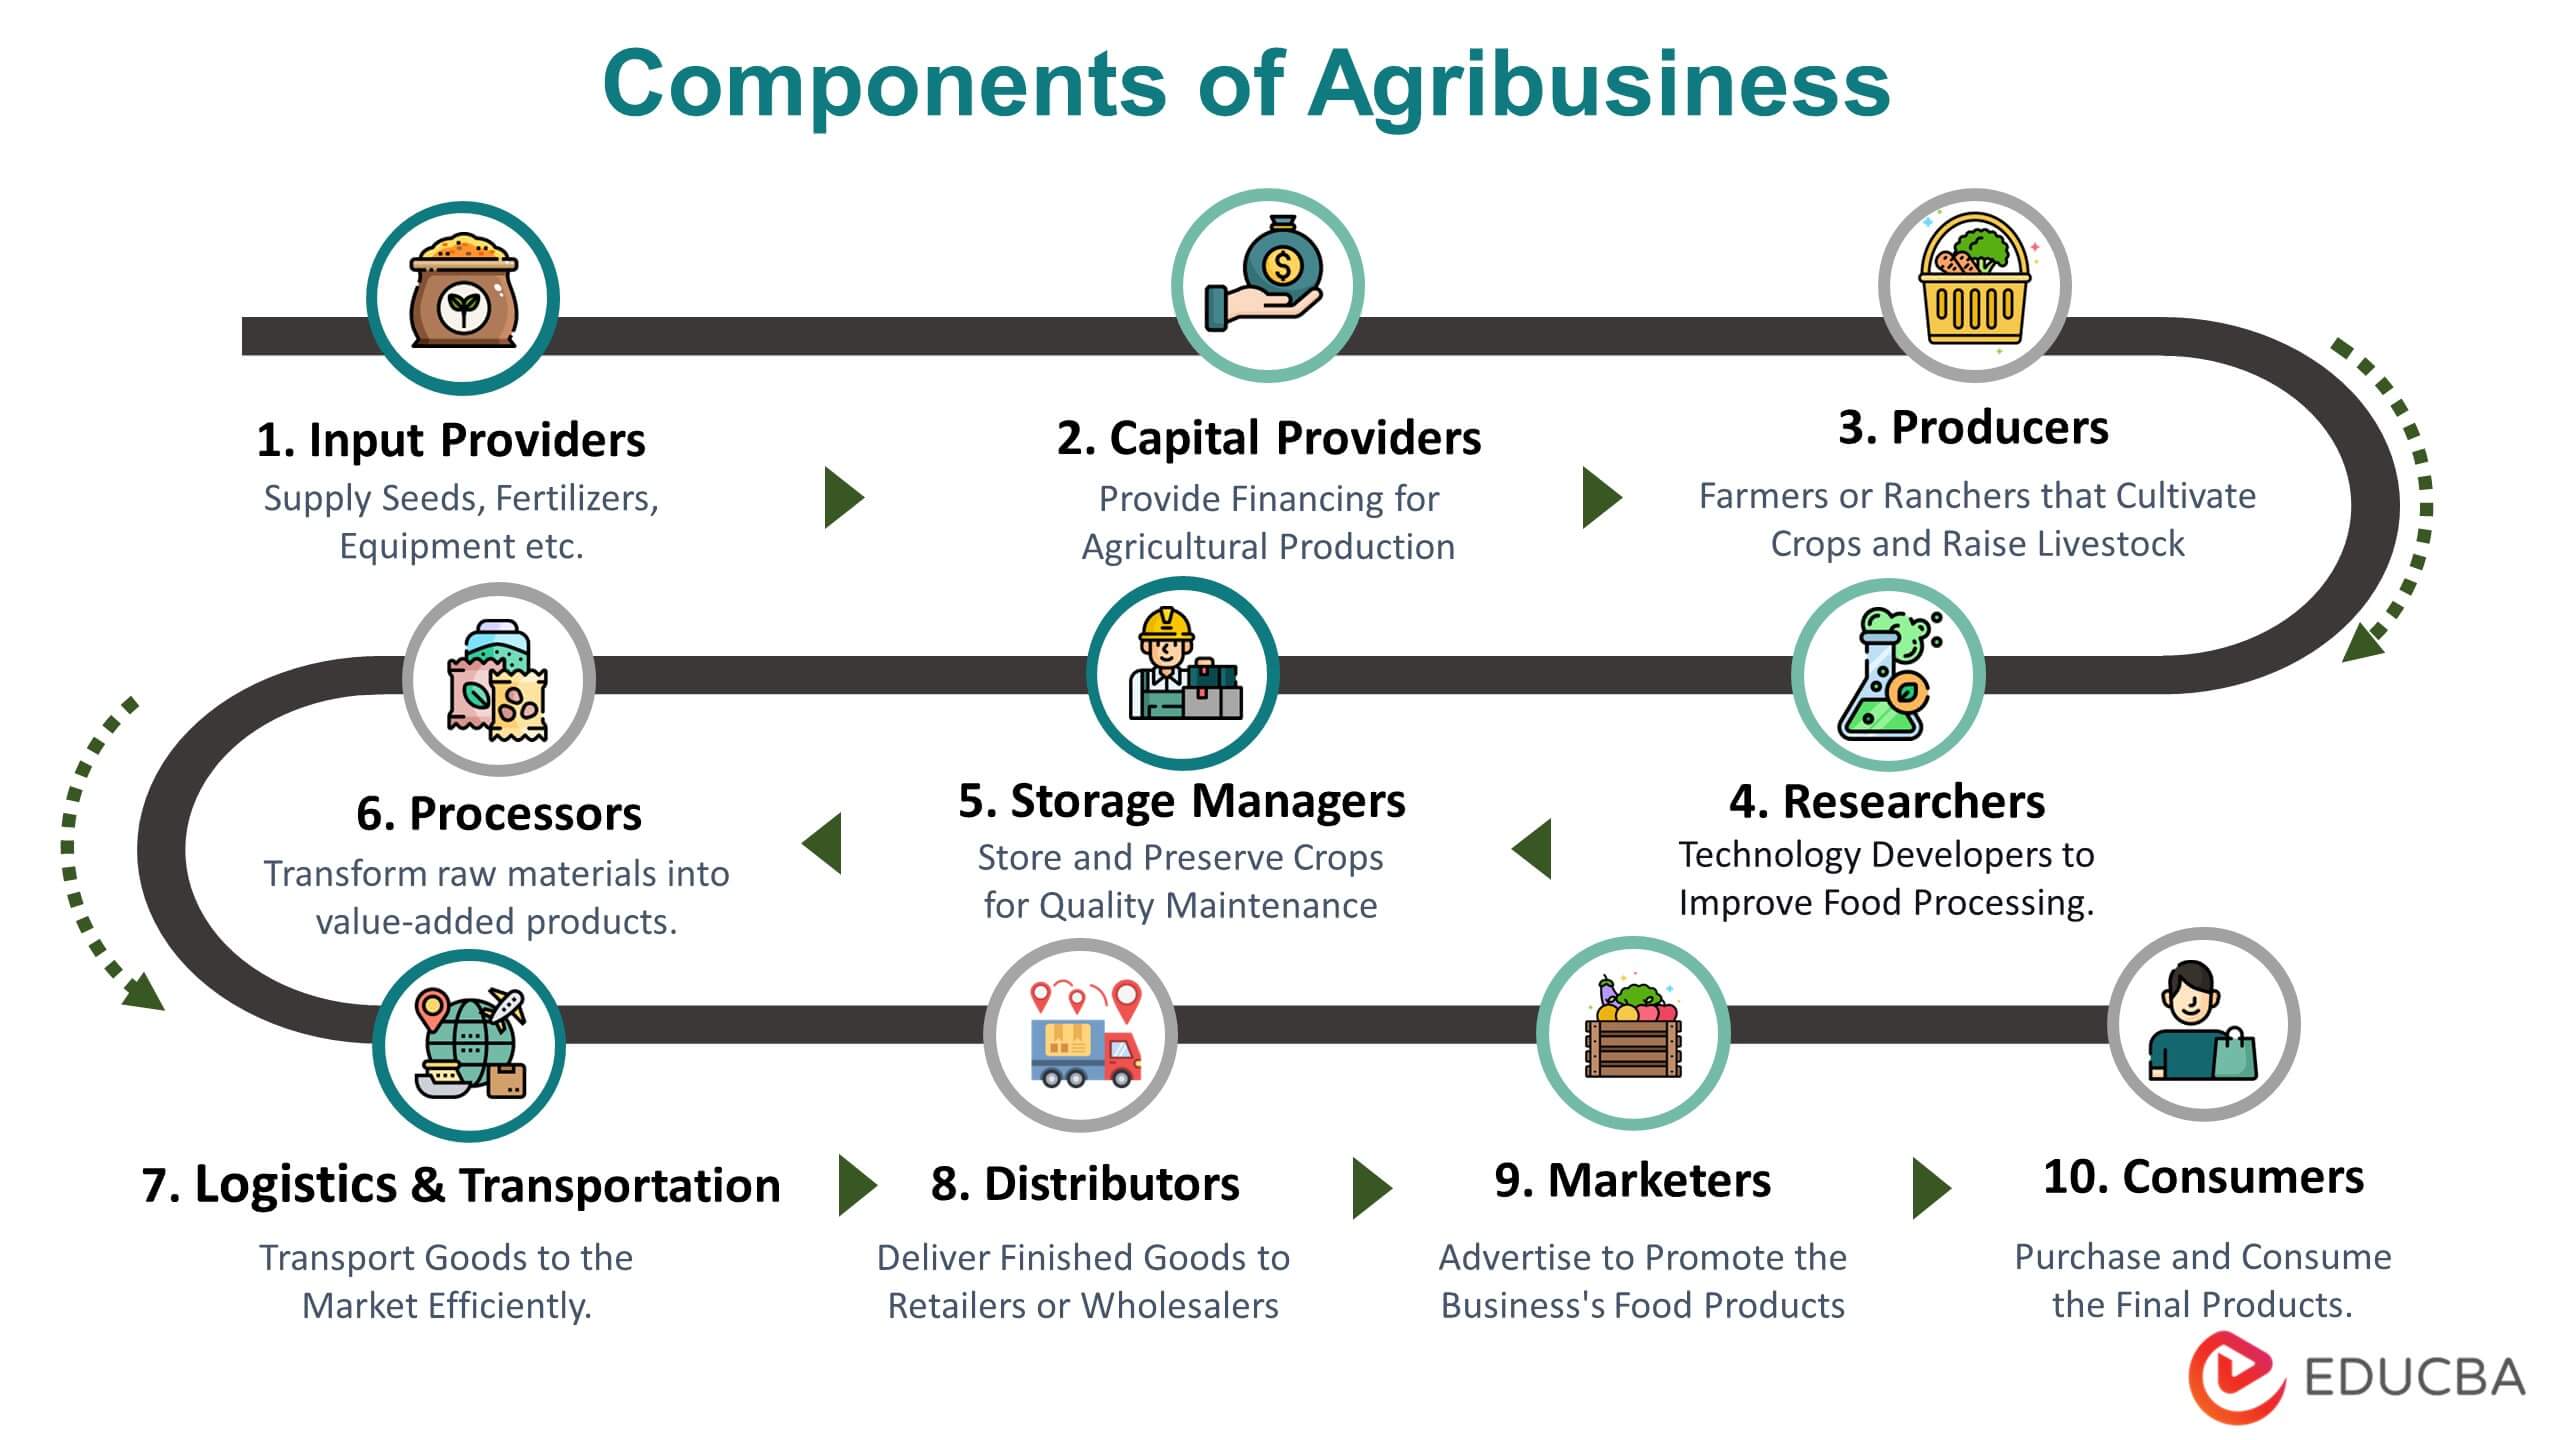 Components of Agribusiness